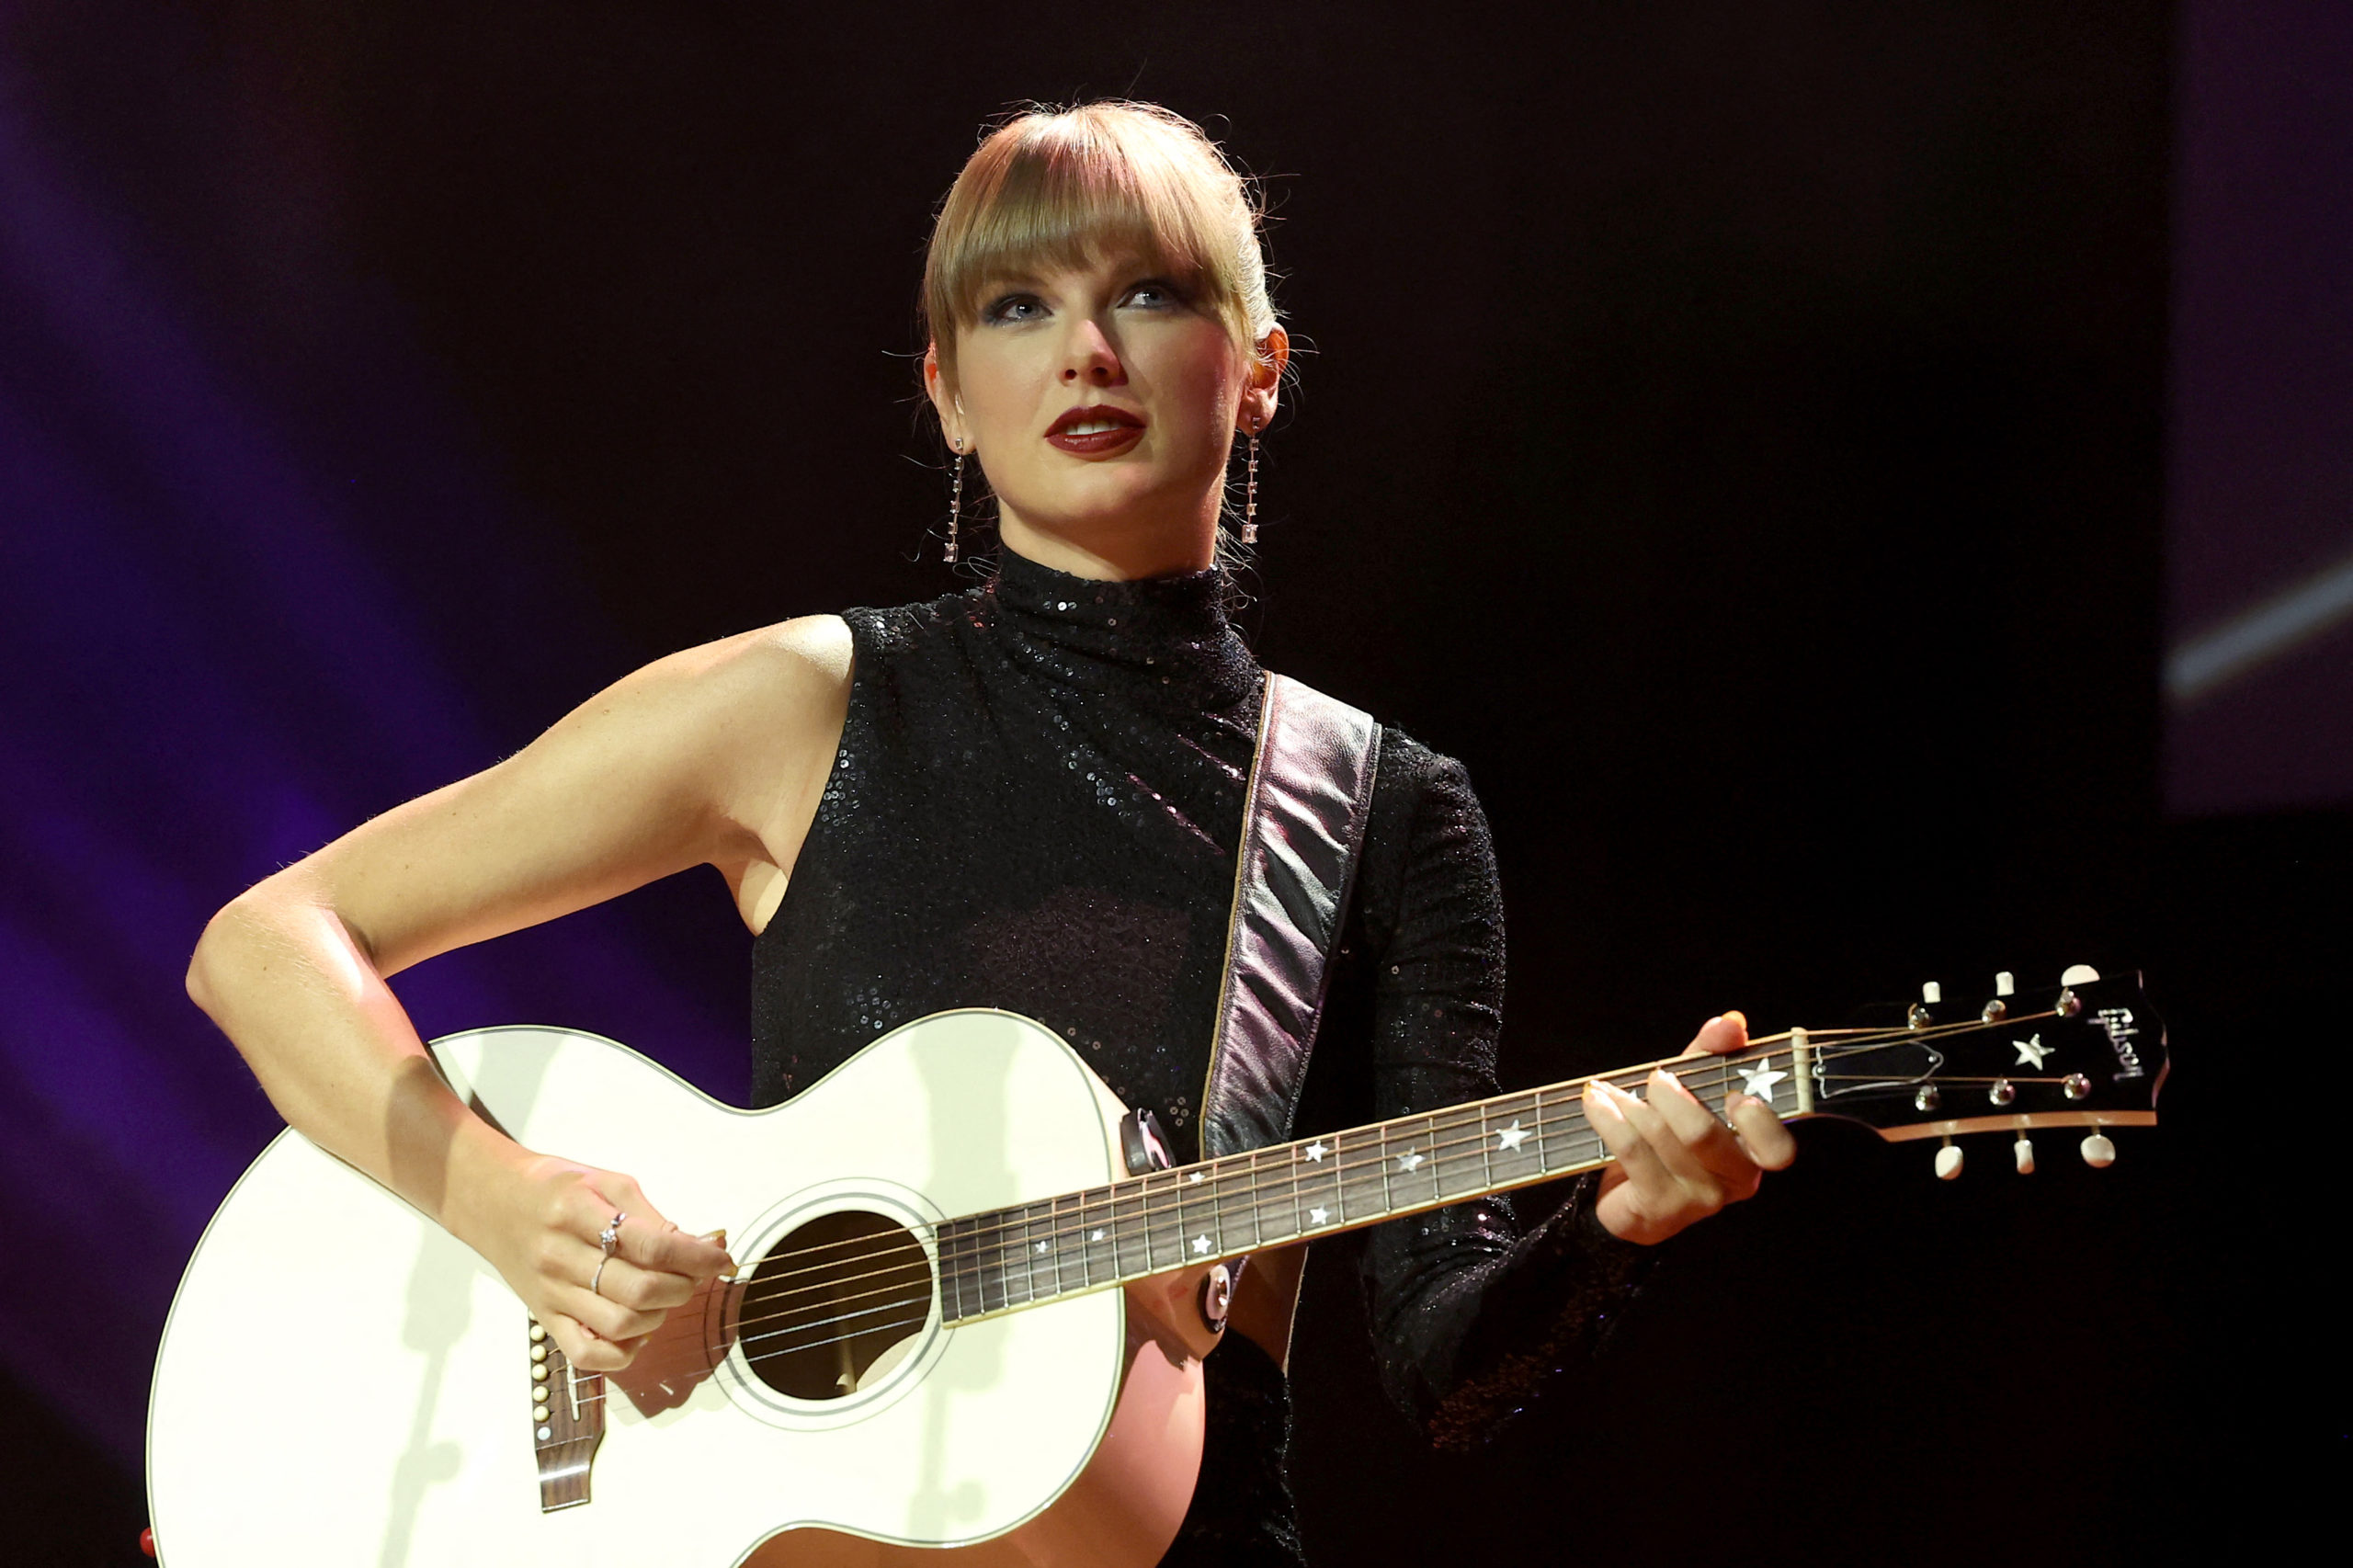 Songwriter-Artist of the Decade honoree, Taylor Swift performs onstage during NSAI 2022 Nashville Songwriter Awards at Ryman Auditorium on September 20, 2022 in Nashville, Tennessee. Terry Wyatt/Getty Images/AFP (Photo by Terry Wyatt / GETTY IMAGES NORTH AMERI